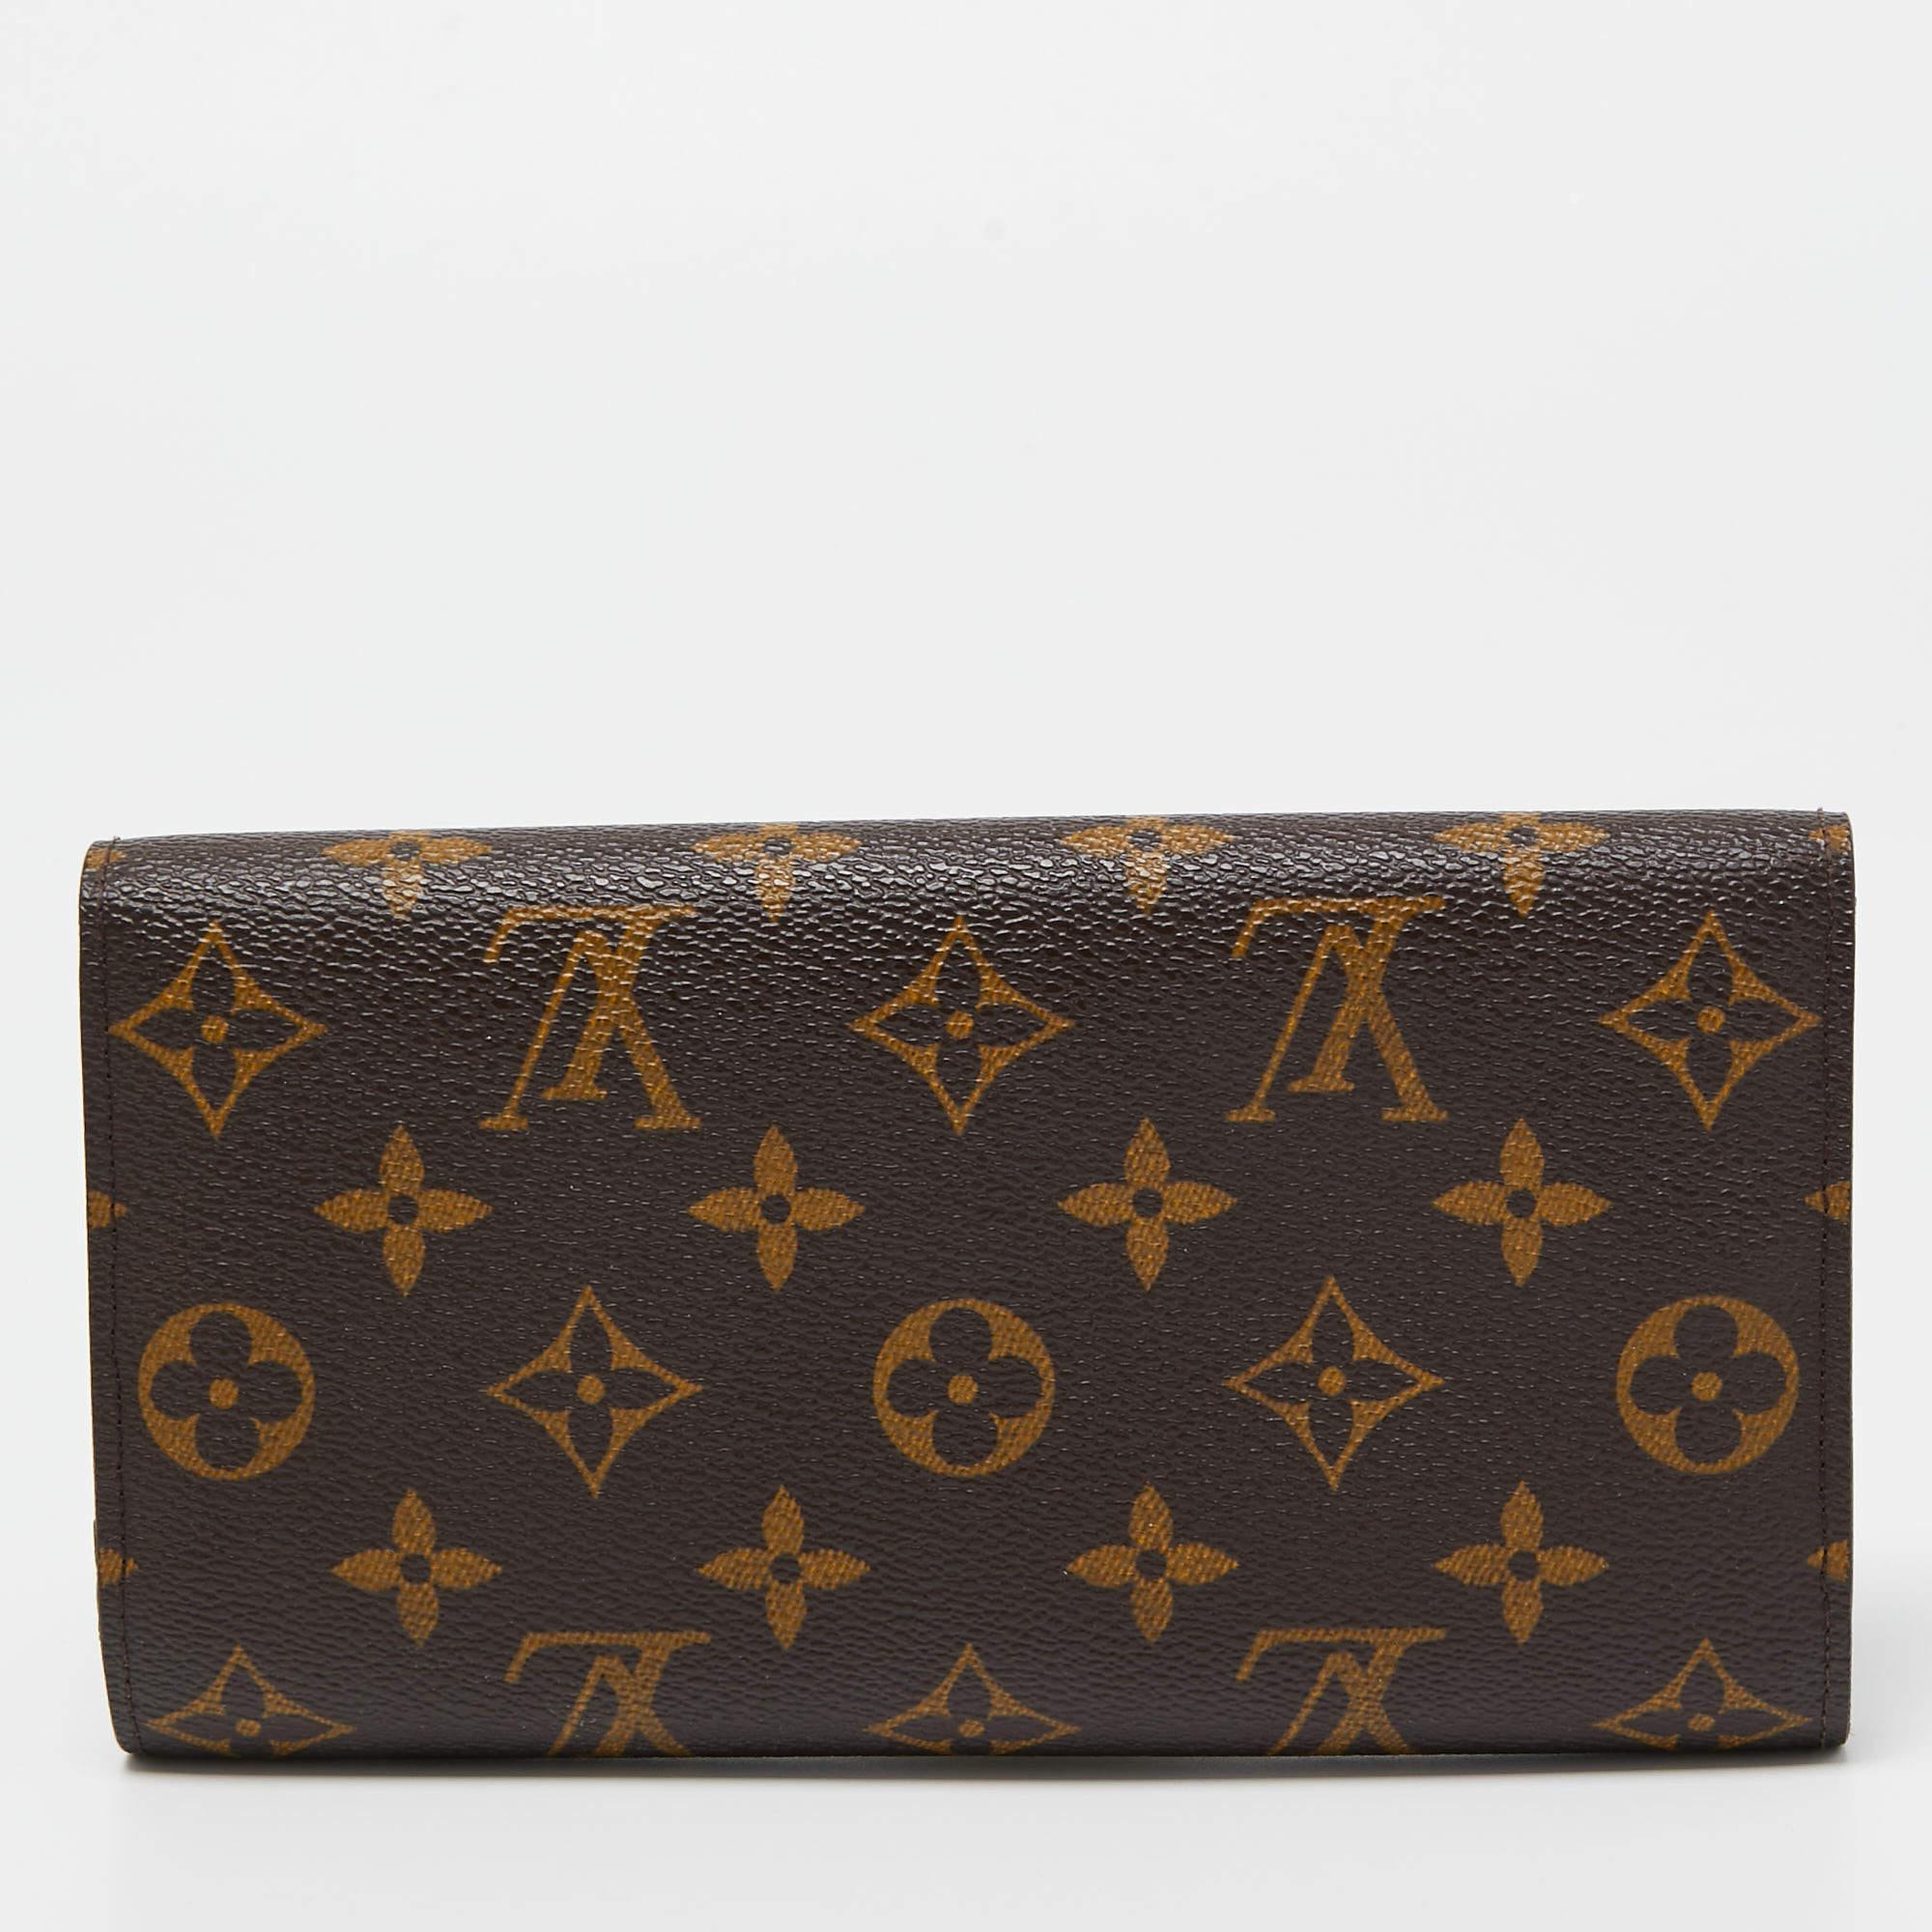 Add the LV touch to your everyday style with this gorgeous Porte Tresor International wallet. The exterior is covered in monogram canvas, giving the wallet a classic look as it protects and organizes your cards and cash.

